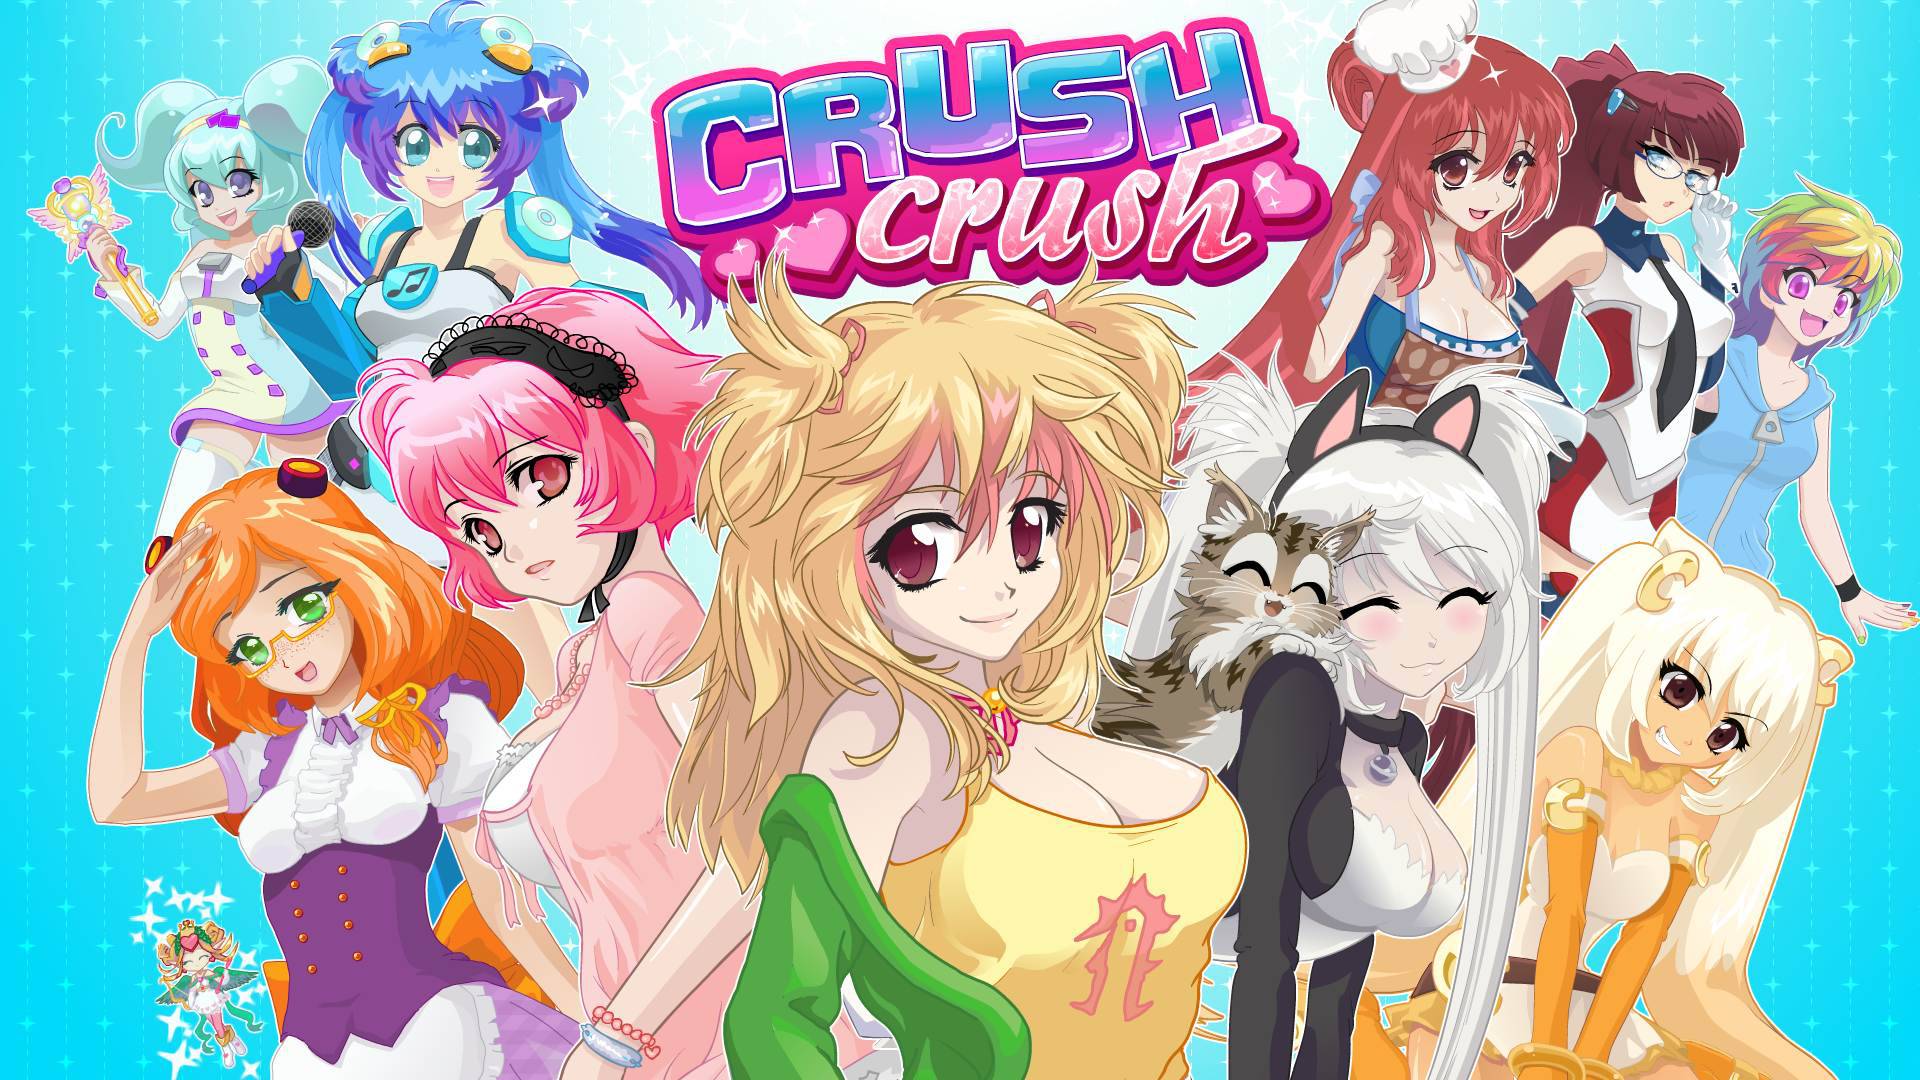 All Event Pin Ups and Outfits for Crush Crush.